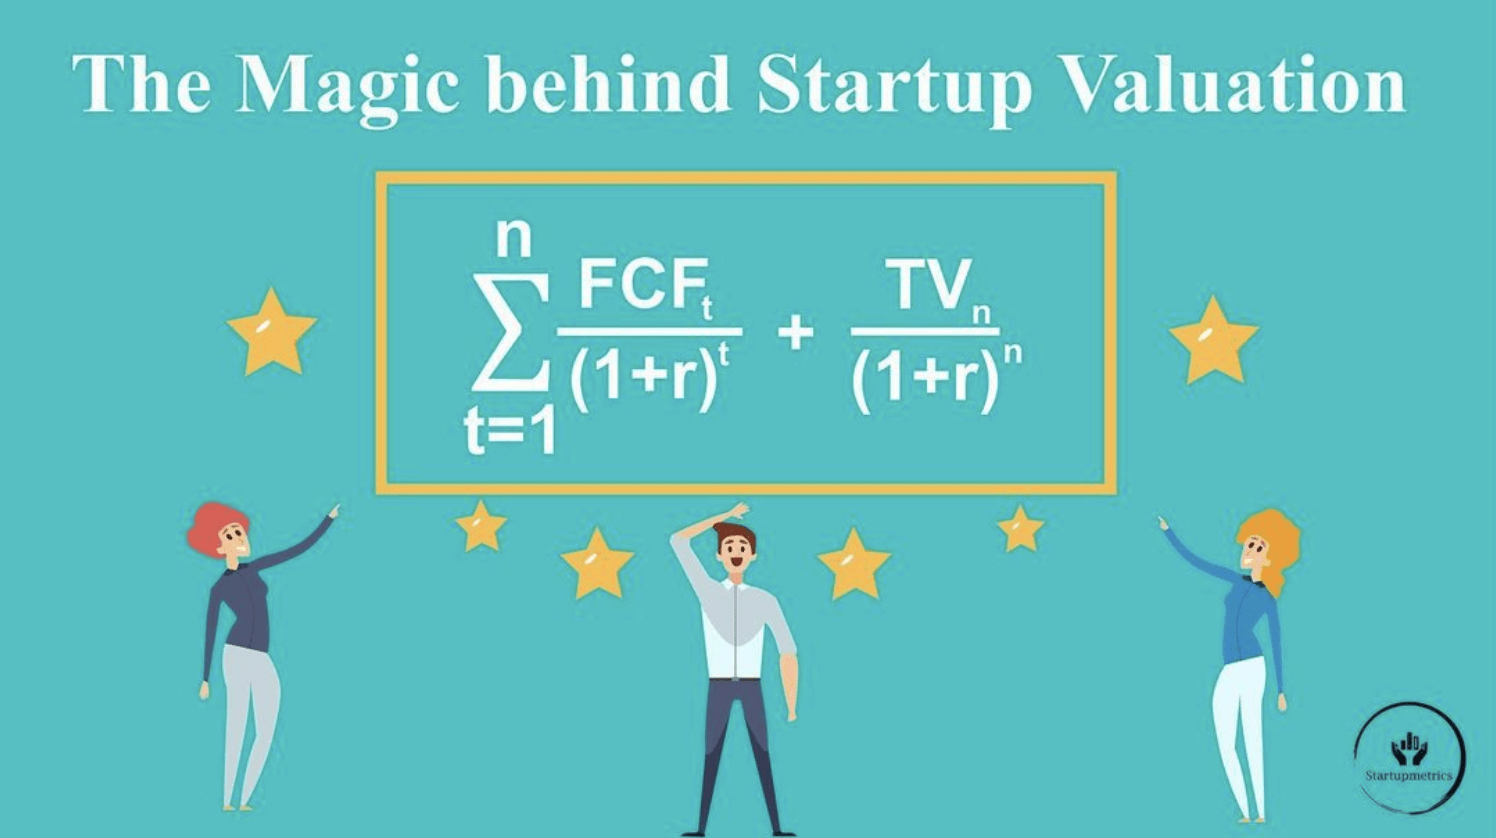 The Magic behind Startup Valuation